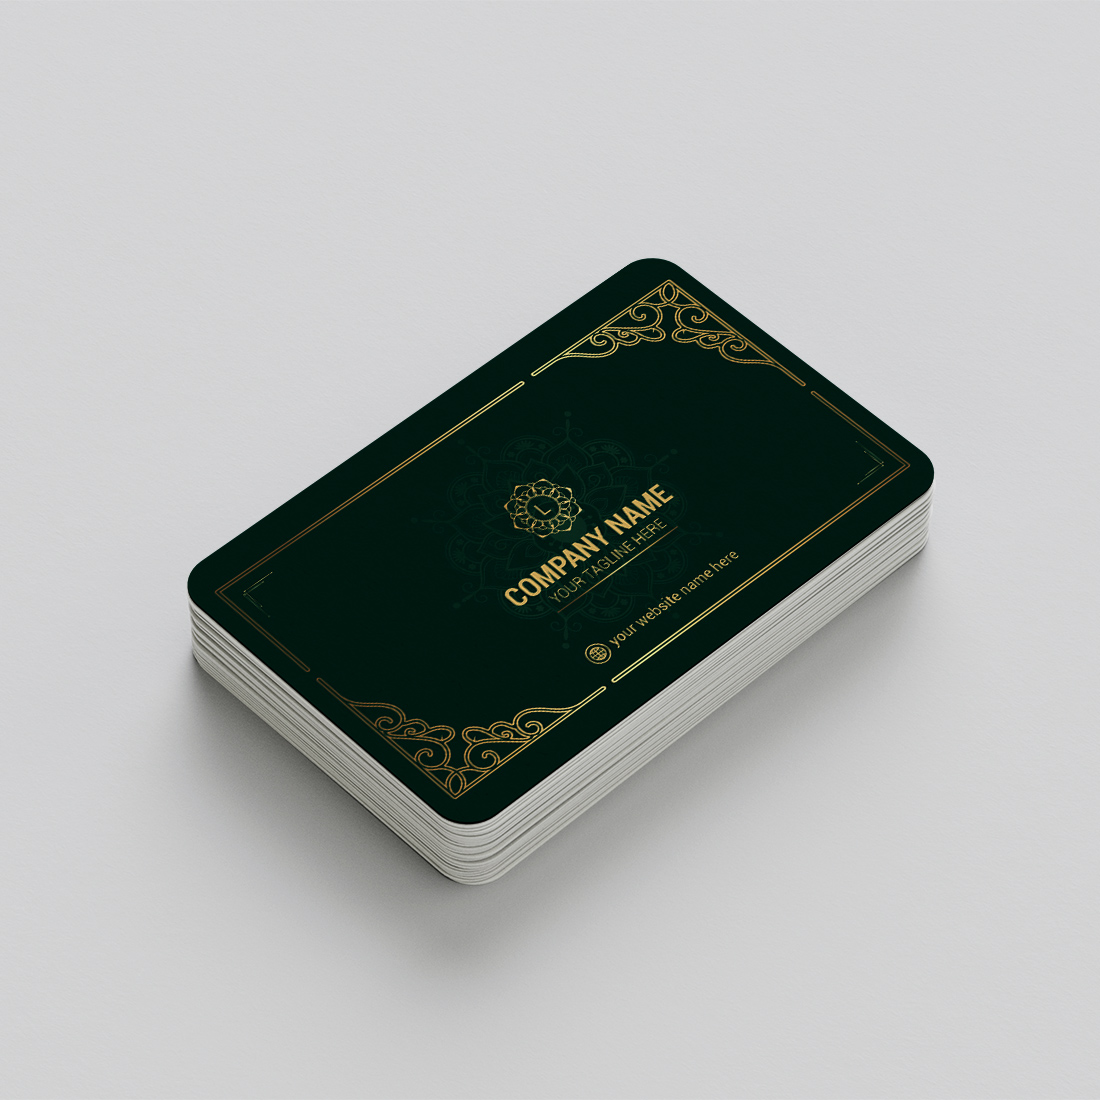 Green and gold business card on a white surface.